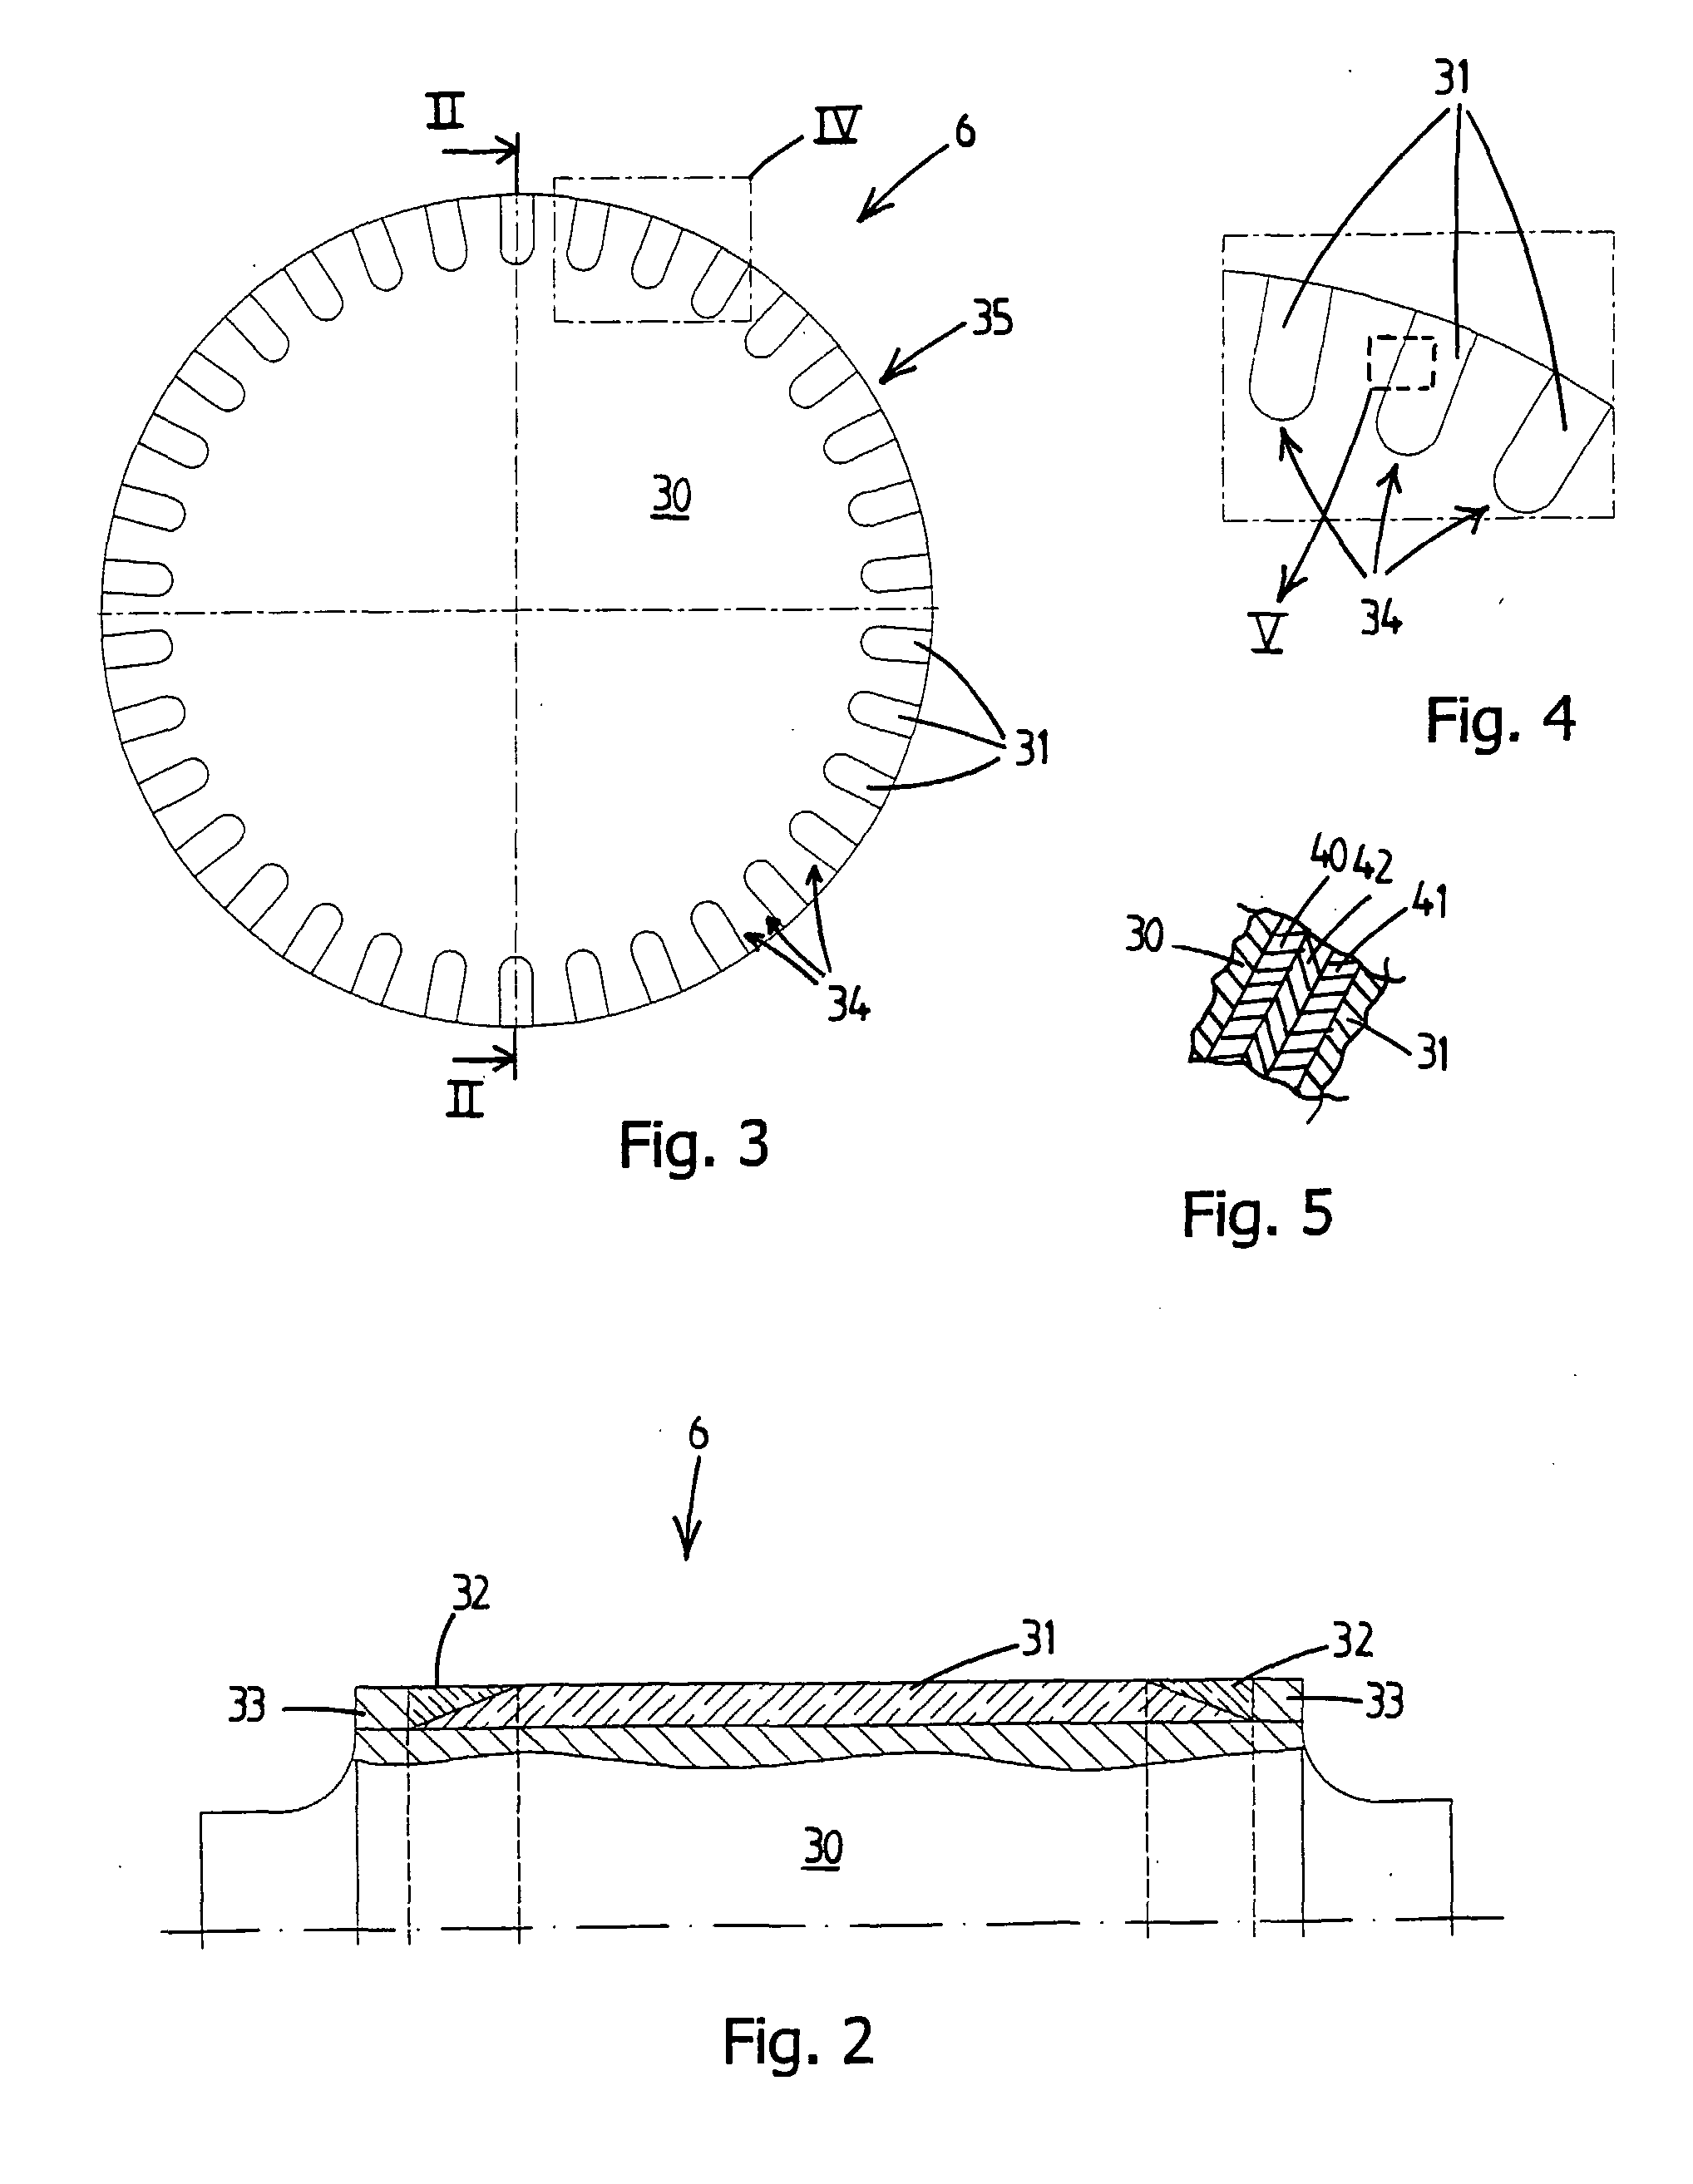 Rotor for Electric Motor, Compressor Unit Provided with Rotor, Method for Producing a Rotor for an Electric Motor